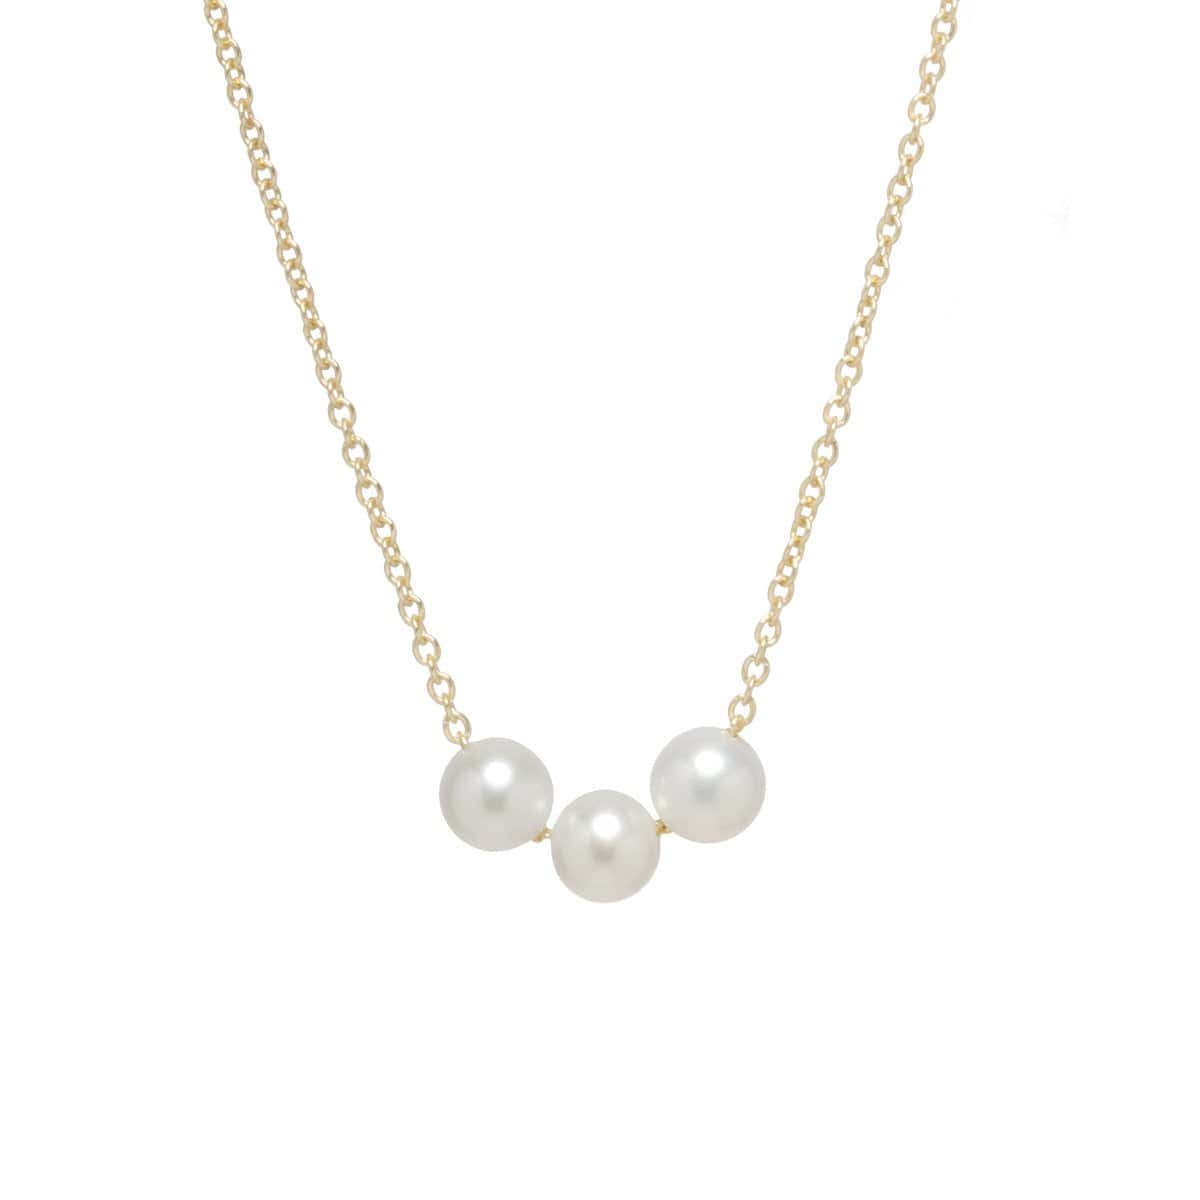 NKL-14K 14K Gold 3 Small Pearl Necklace